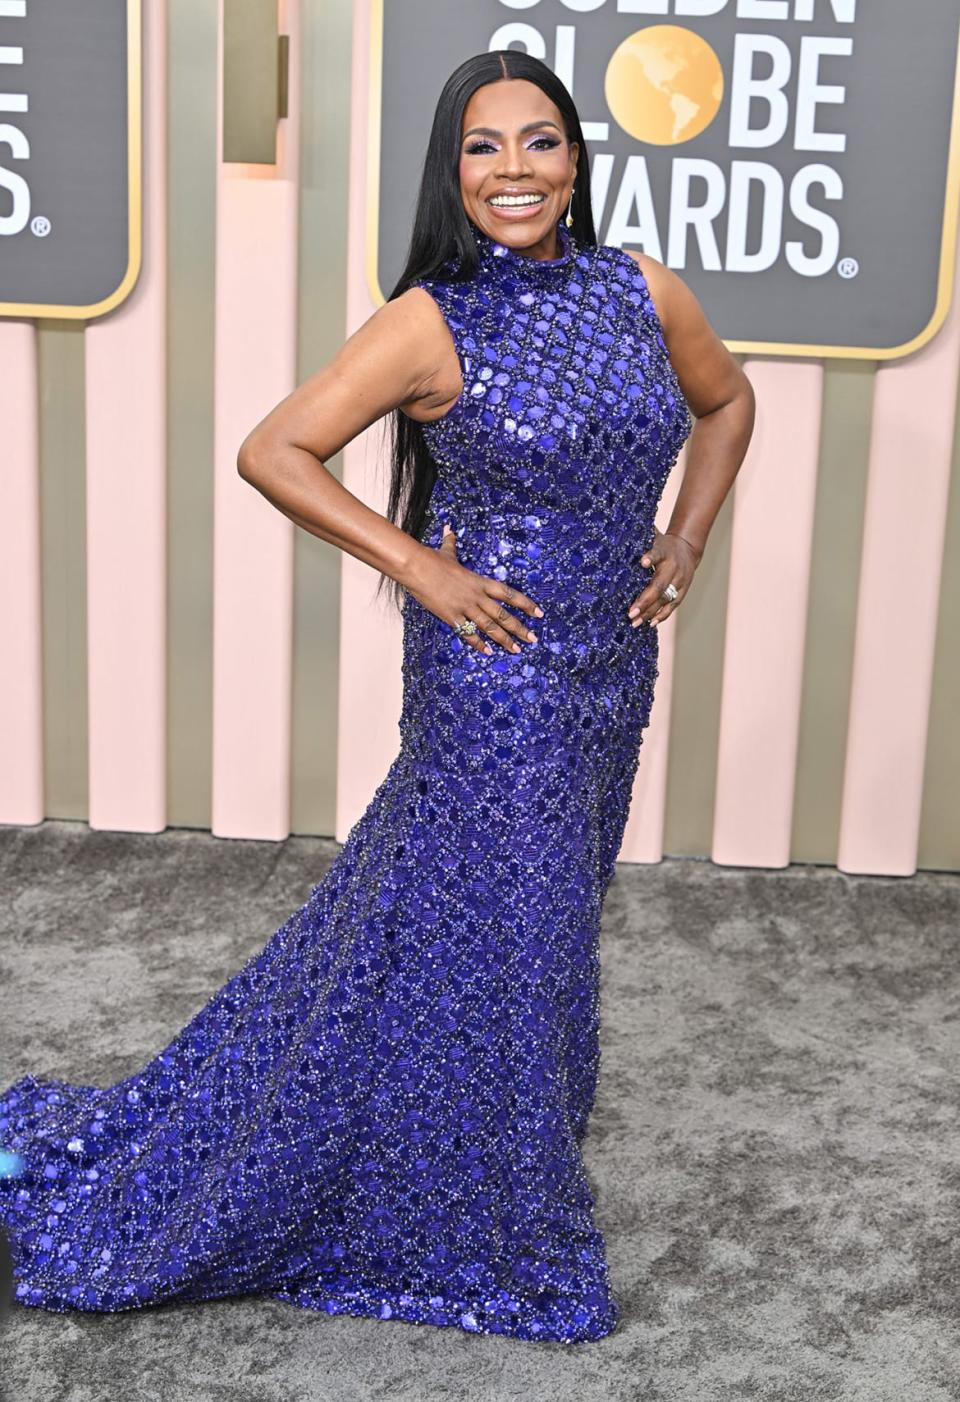 <div class="inline-image__caption"><p>Sheryl Lee Ralph arrives for the 80th annual Golden Globe Awards at The Beverly Hilton hotel in Beverly Hills, California, on January 10, 2023.</p></div> <div class="inline-image__credit">Frederic J. Brown/AFP via Getty Images</div>